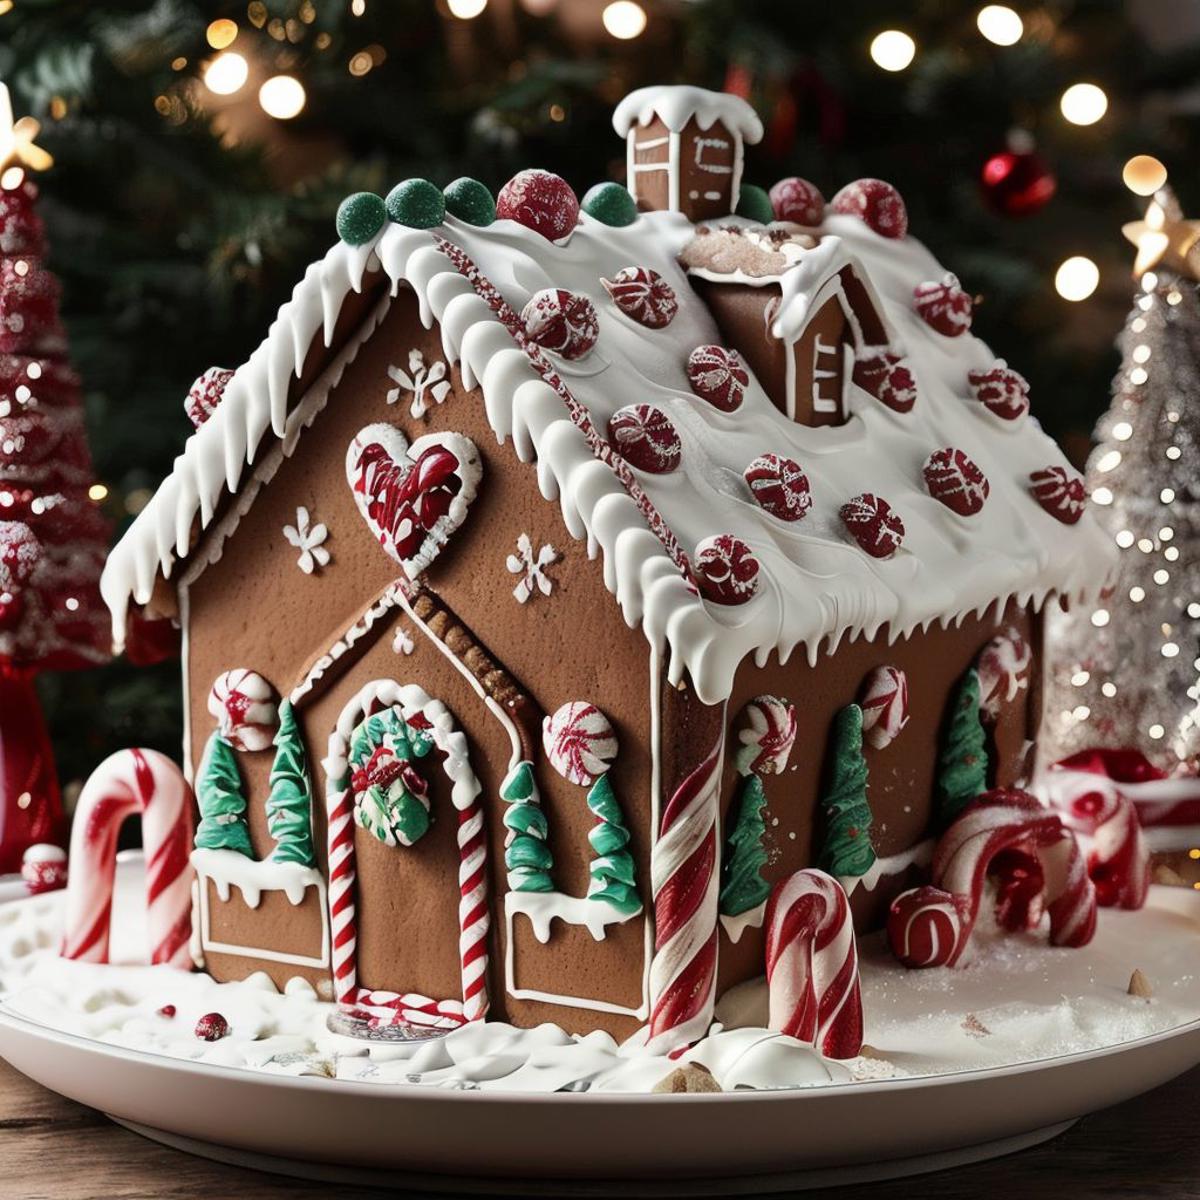 Gingerbread House image by Flexability